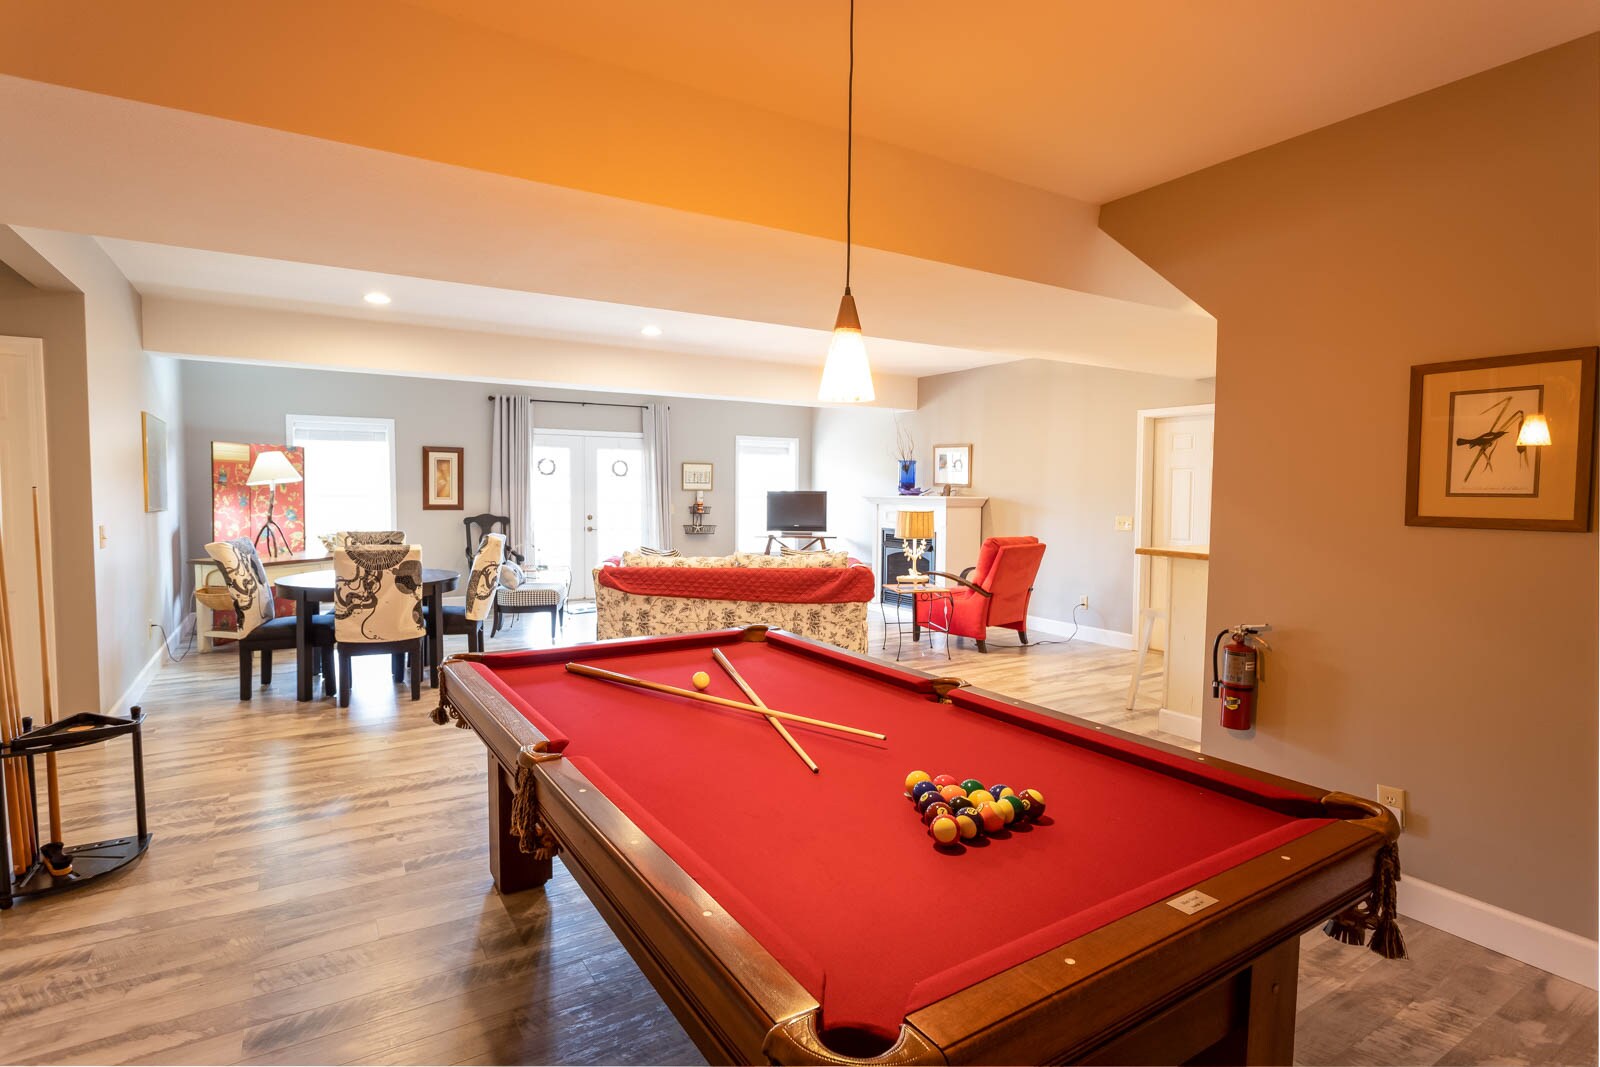 Lower Level Family Room with a Pool Table